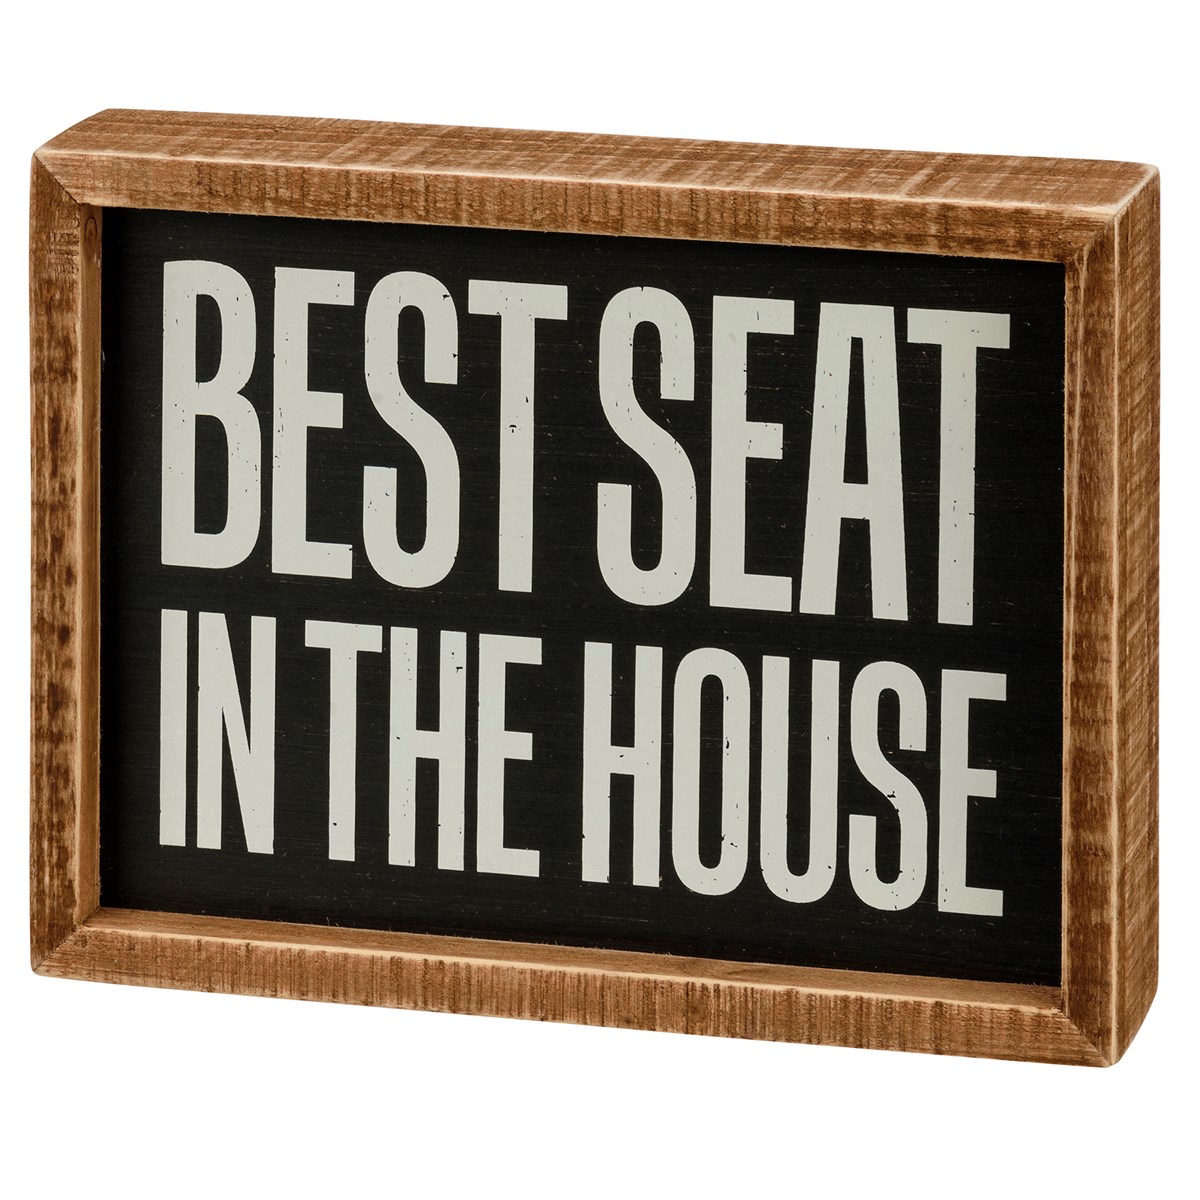 Best Seat Inset Box Sign - Wood